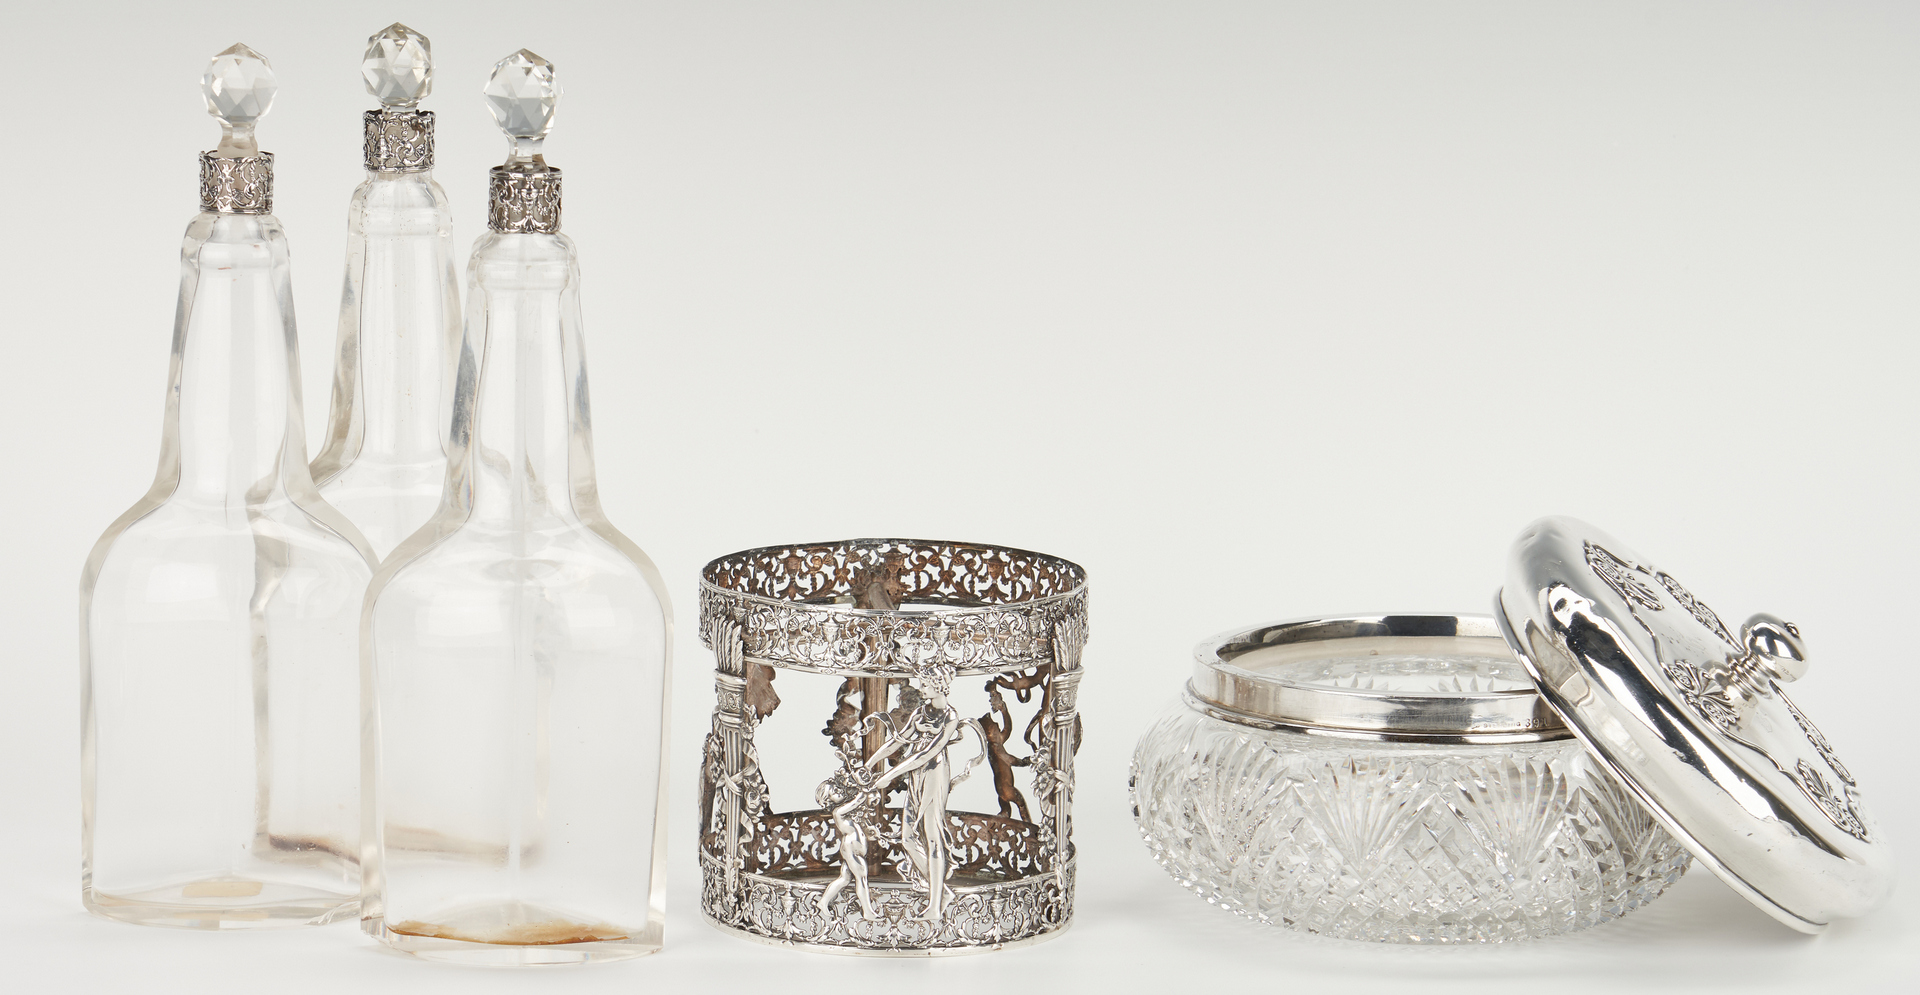 Lot 469: 4 Glass and Silver Items, incl. ABPG, Sterling